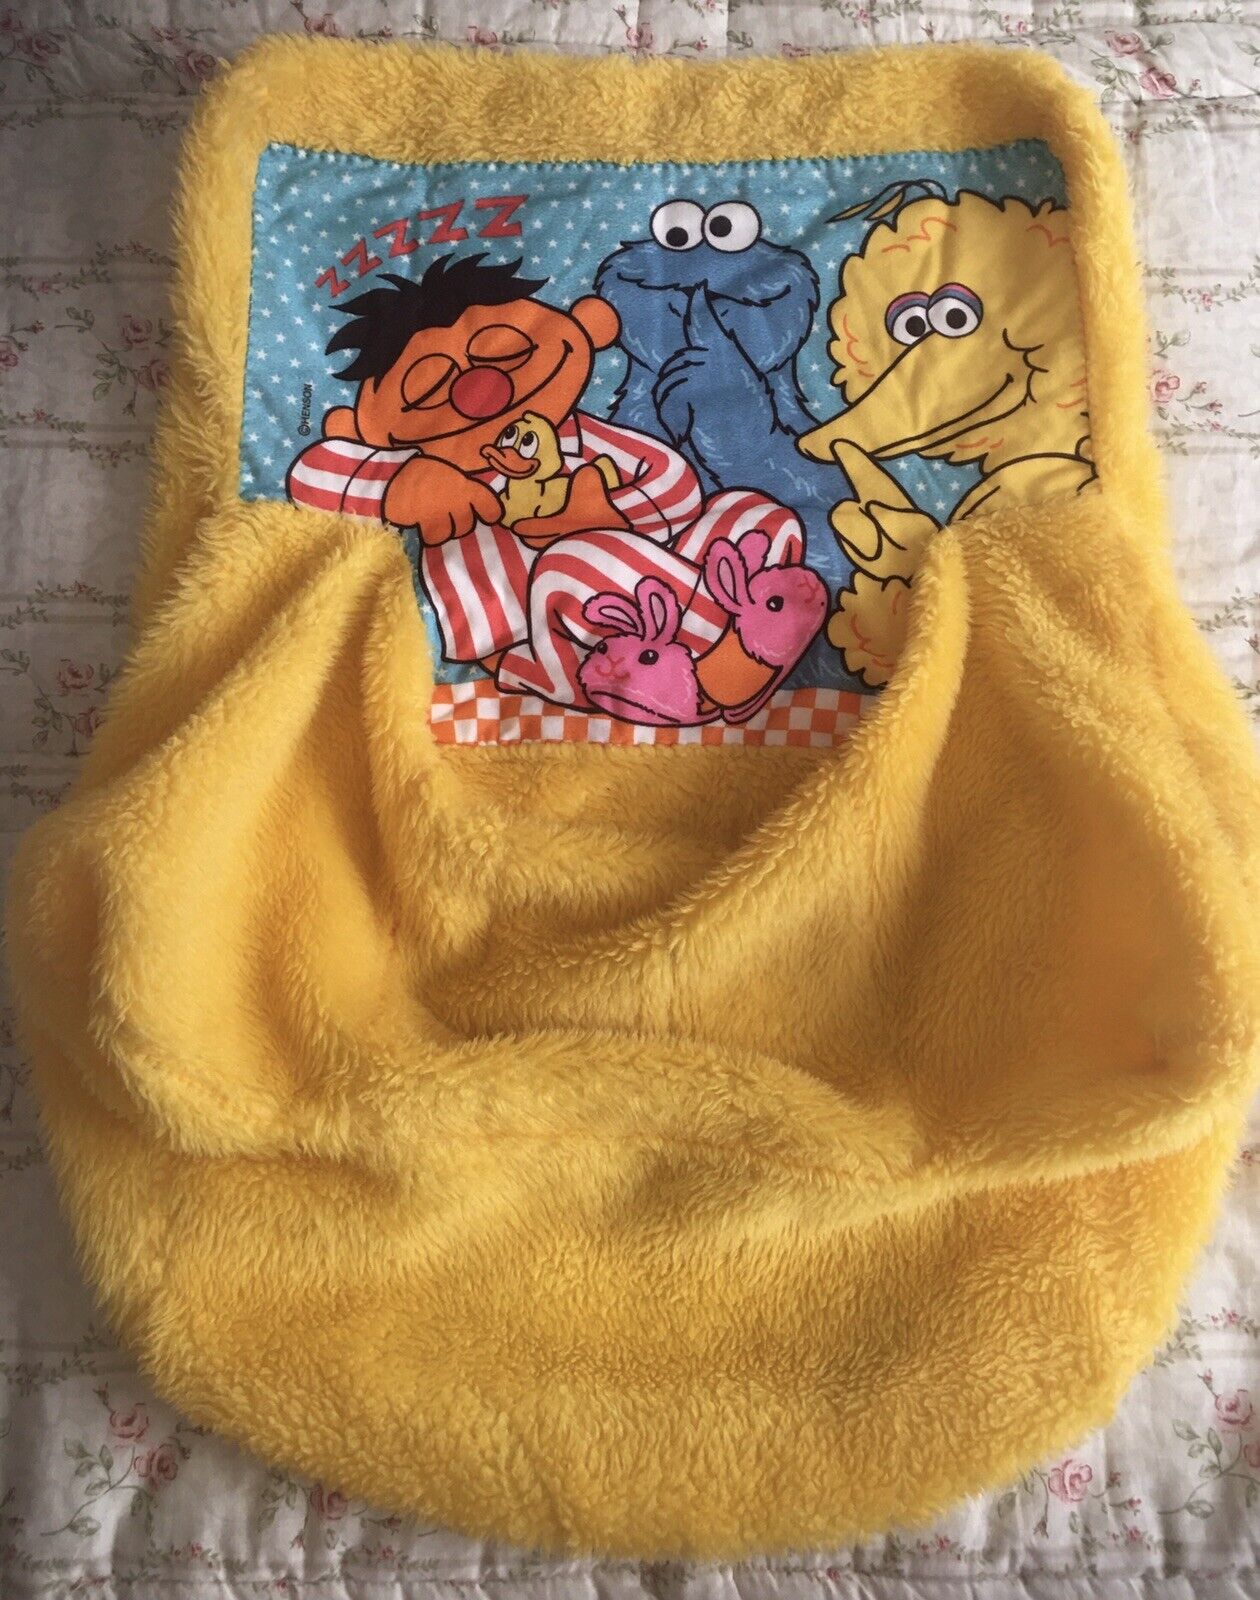 Vintage Sesame Street Kids Child Toddler Foam Plush Chair Replacement Cover! Htf